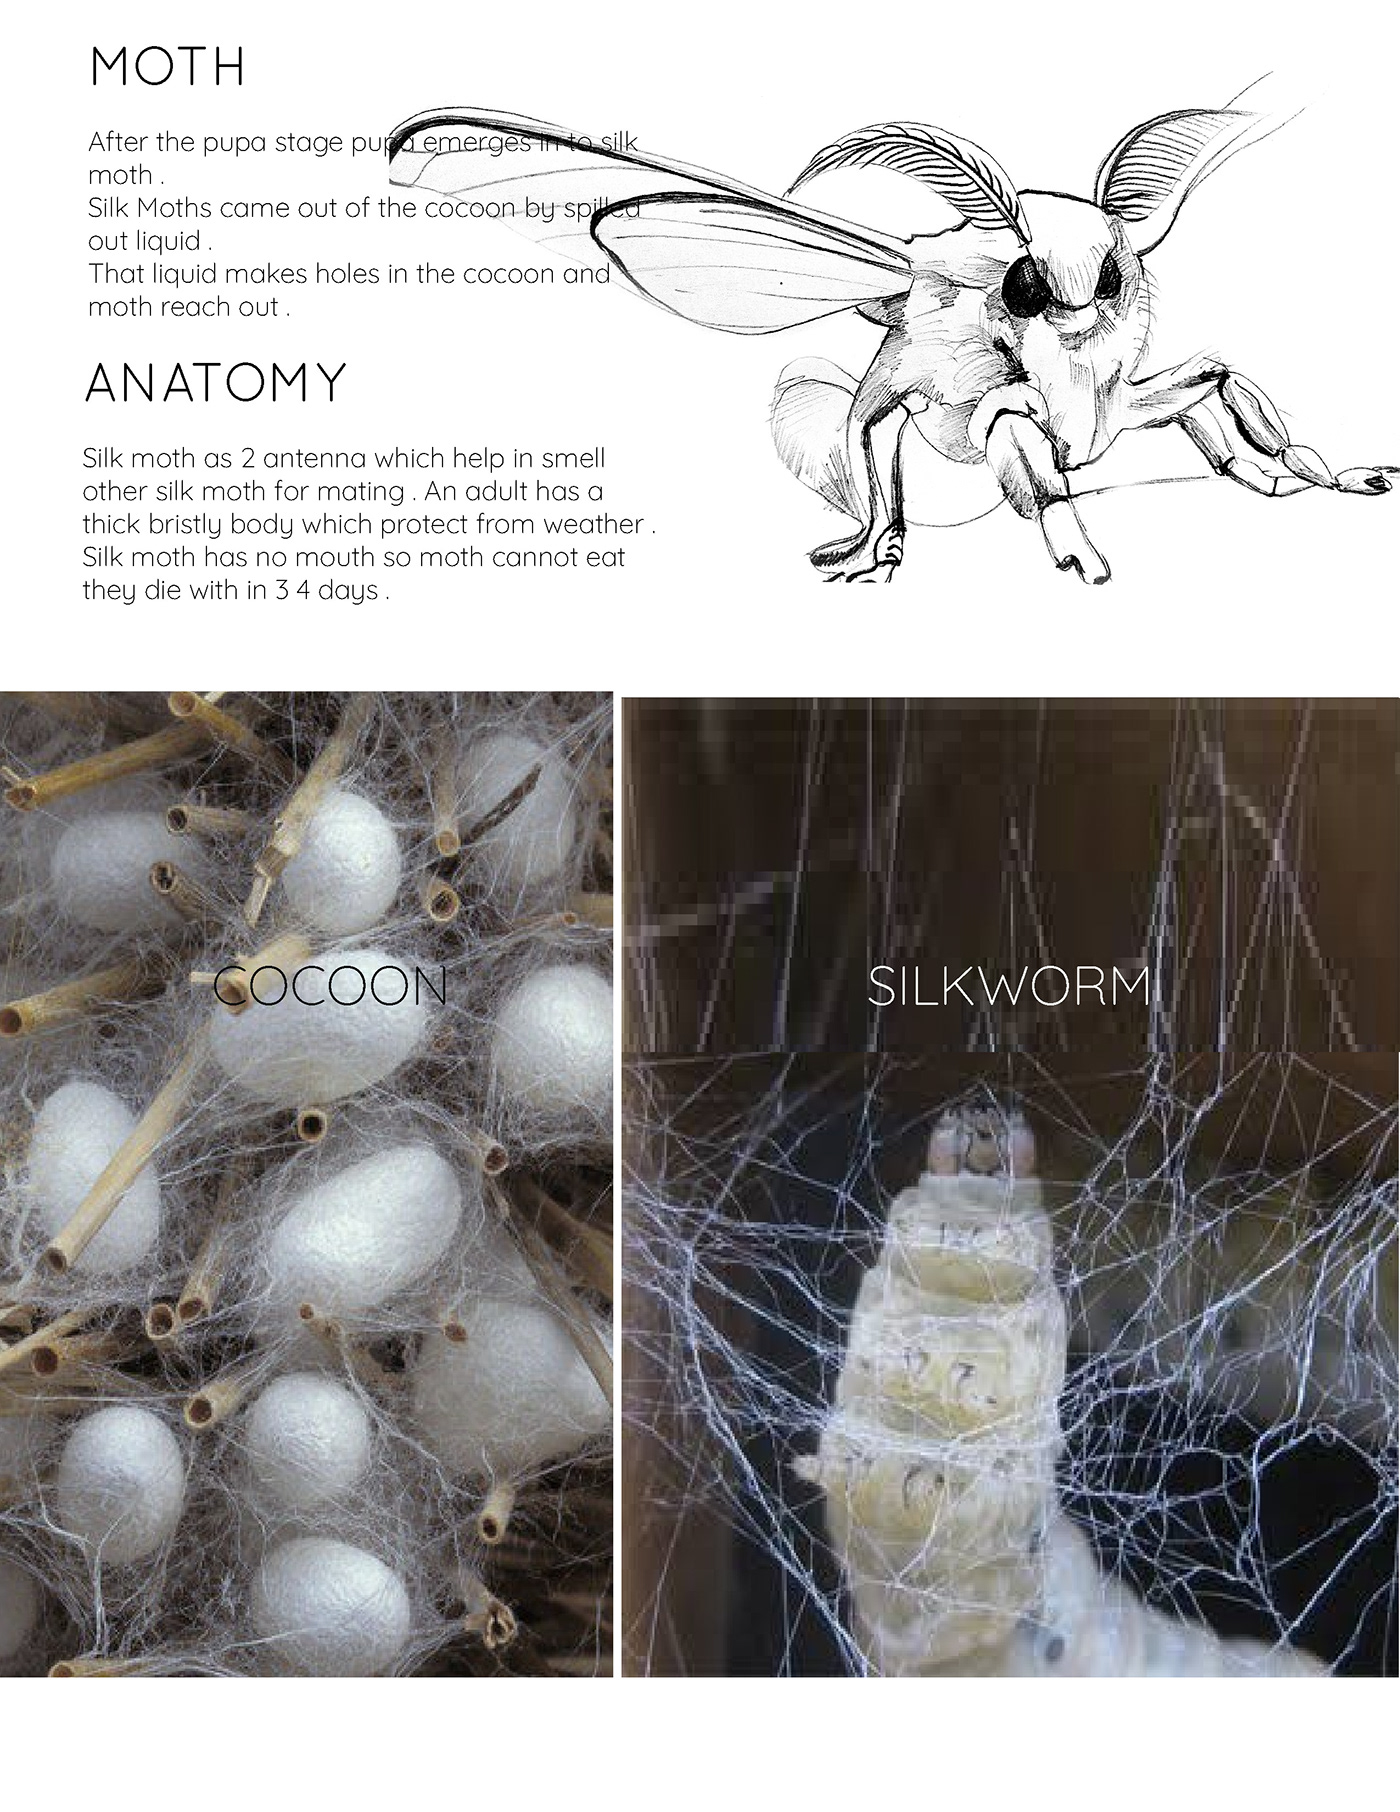 biomimicry insectinspired product design  silkworm